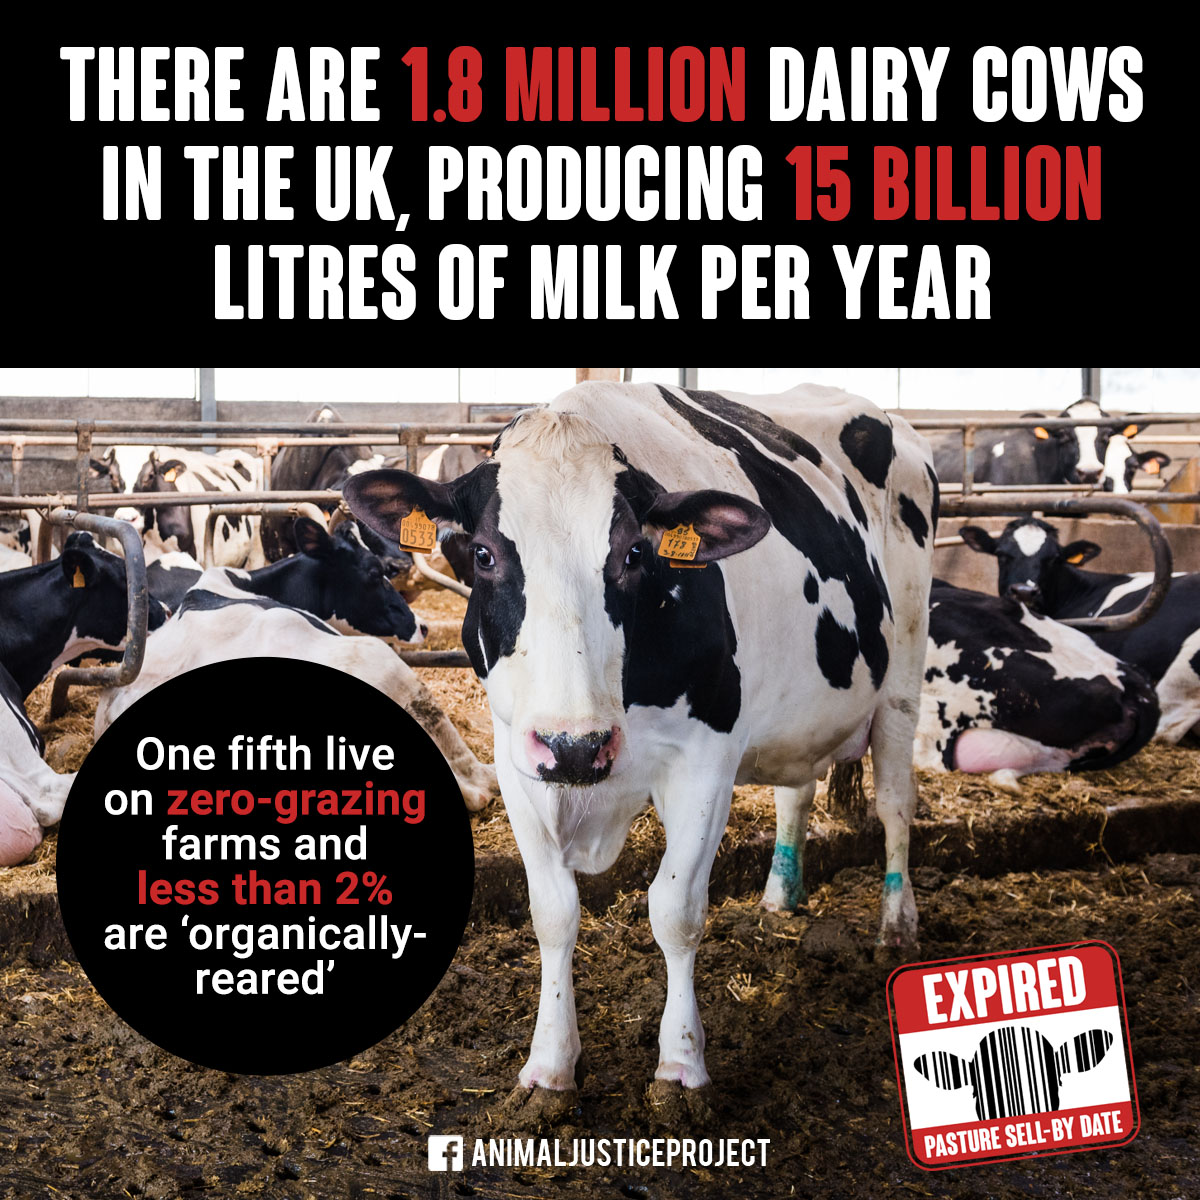 In the UK, there are 1.8 million dairy cows imprisoned on farms, producing 15 billion litres of milk per year. Less than 2% are on organic farms & 20% live on zero-grazing farms. 

dairystillkills.org
#DairyStillKills #EXPIRED #AnimalRights #DairyisScarey #DairysDirtySecret